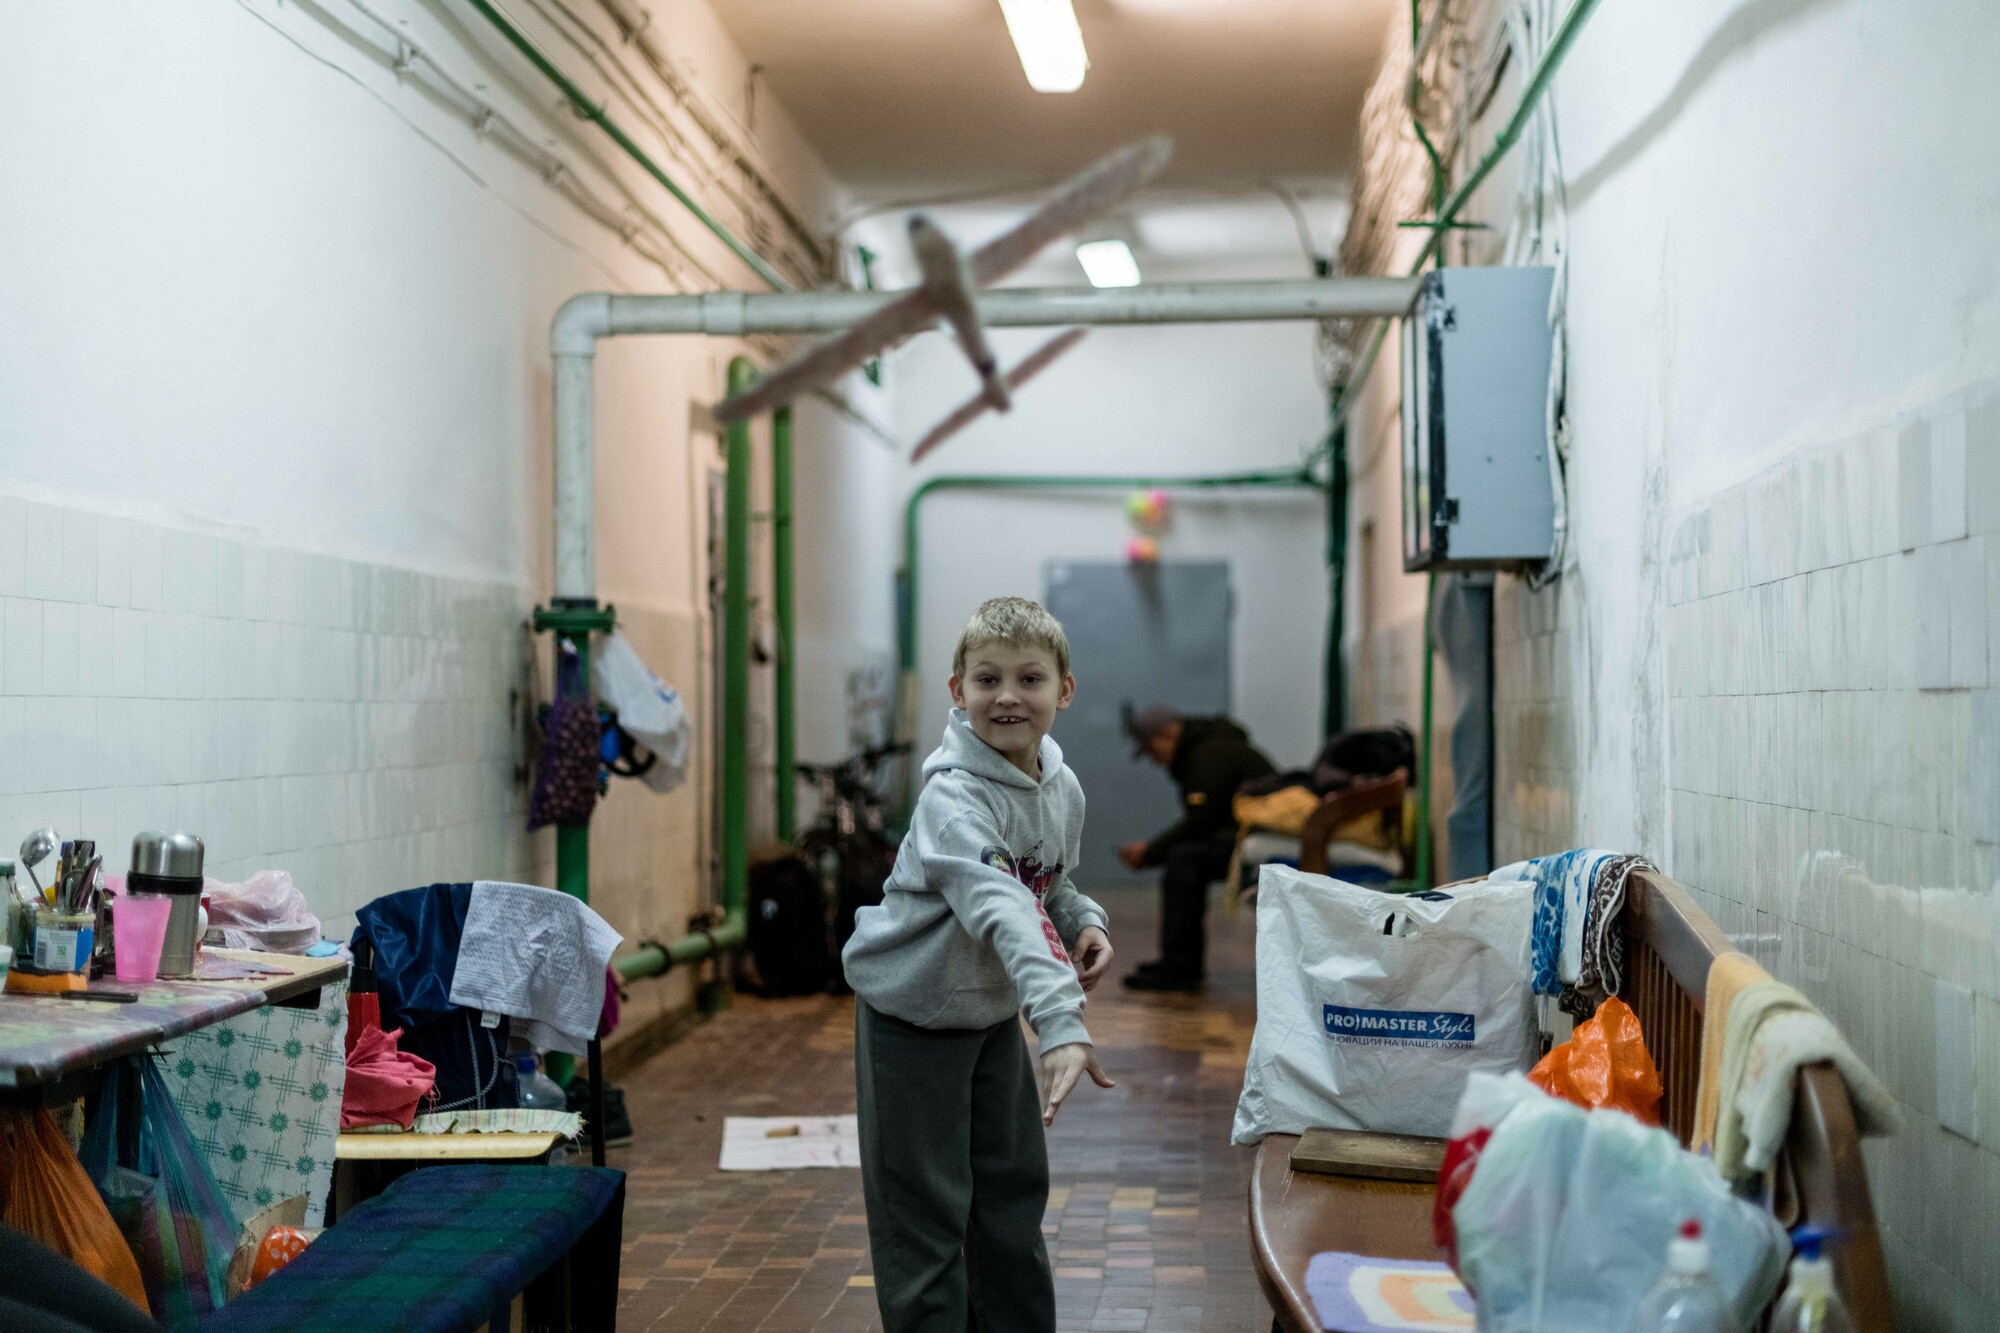 Kolia*, plays with a toy aeroplane in an underground shelter provided with a generator as well as food and other items by Depaul International with funding from CAFOD and Plan International. Image: Maciek Musialek/DEC. 